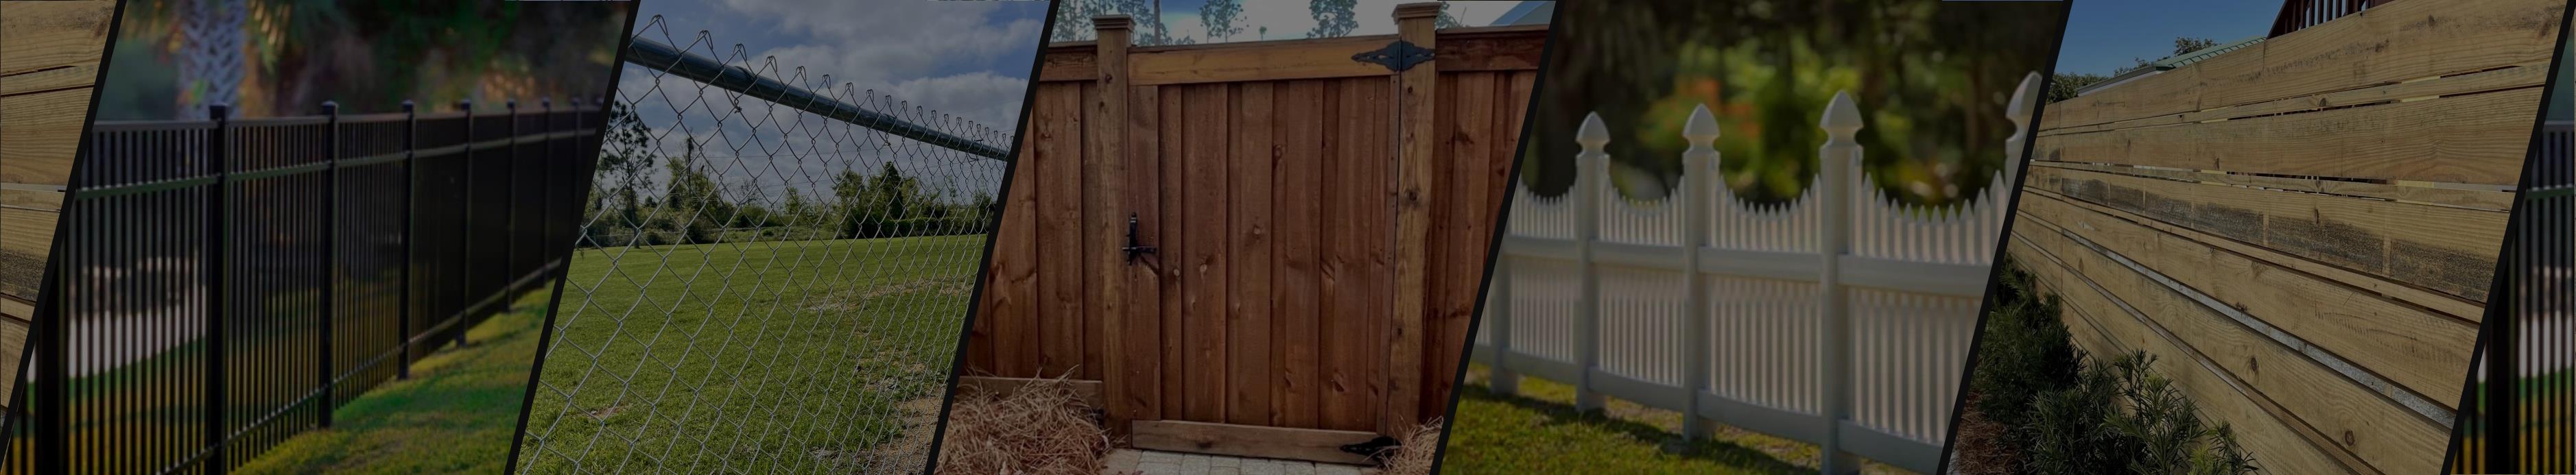 Panama City Florida Residential Fencing